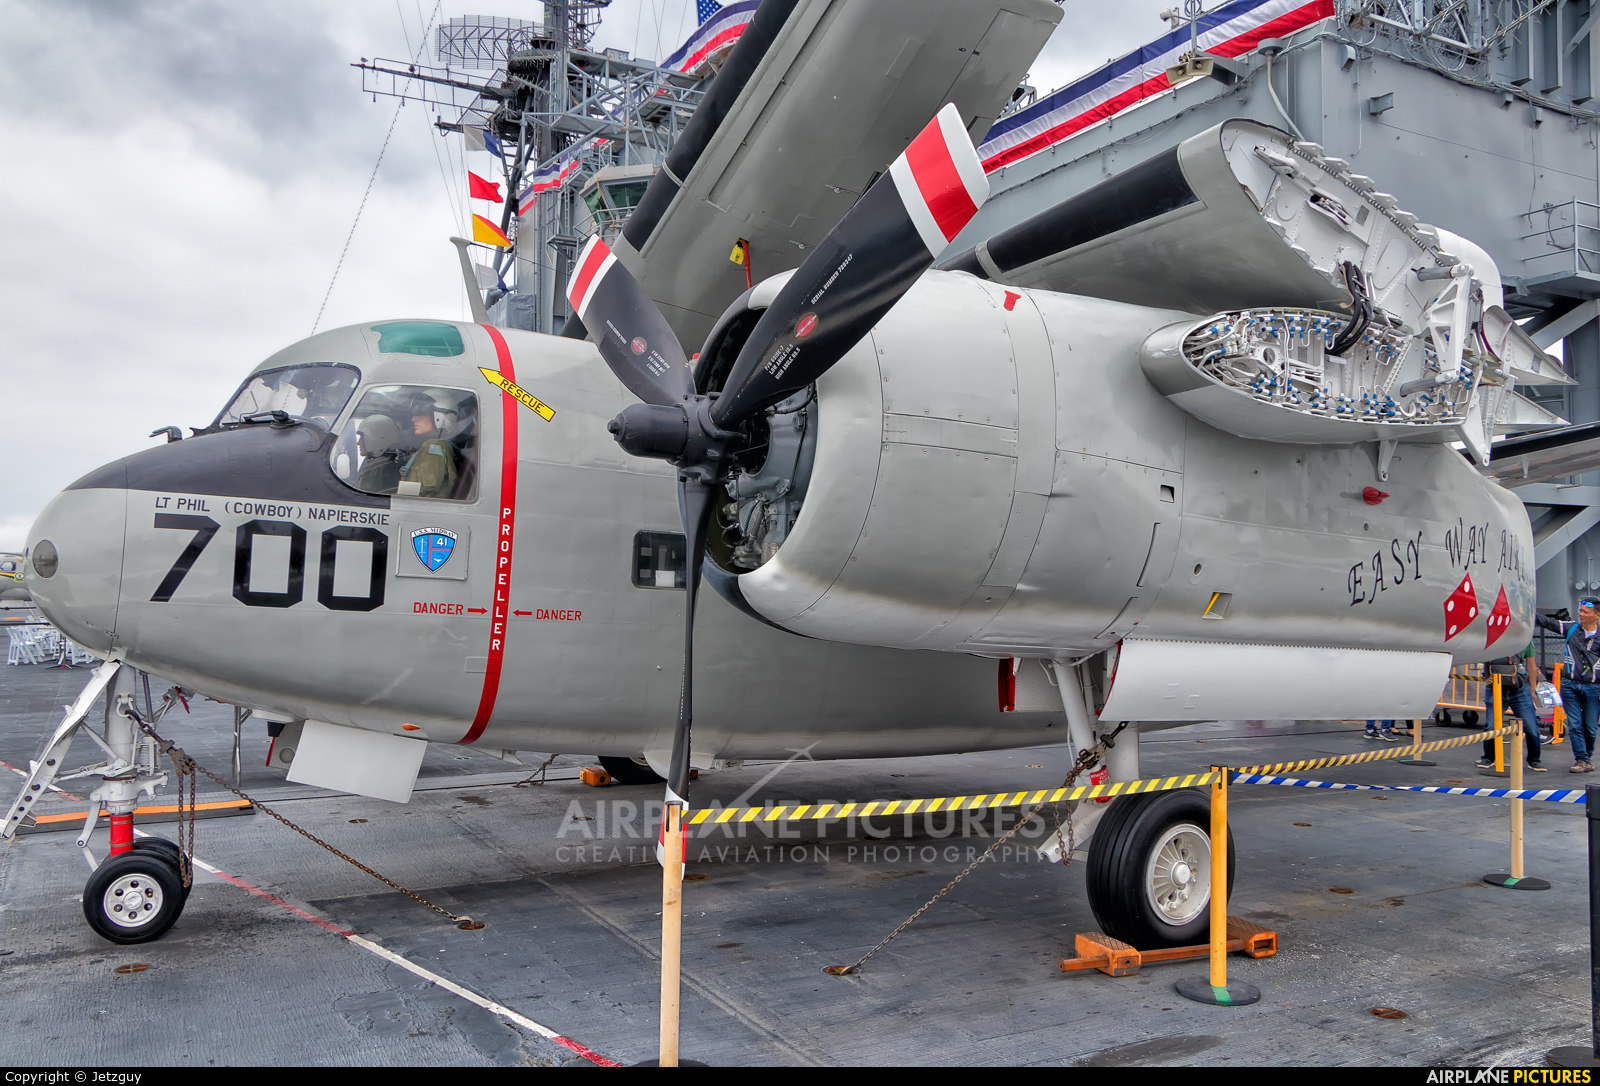 USA - Navy 146036 aircraft at San Diego - USS Midway Museum